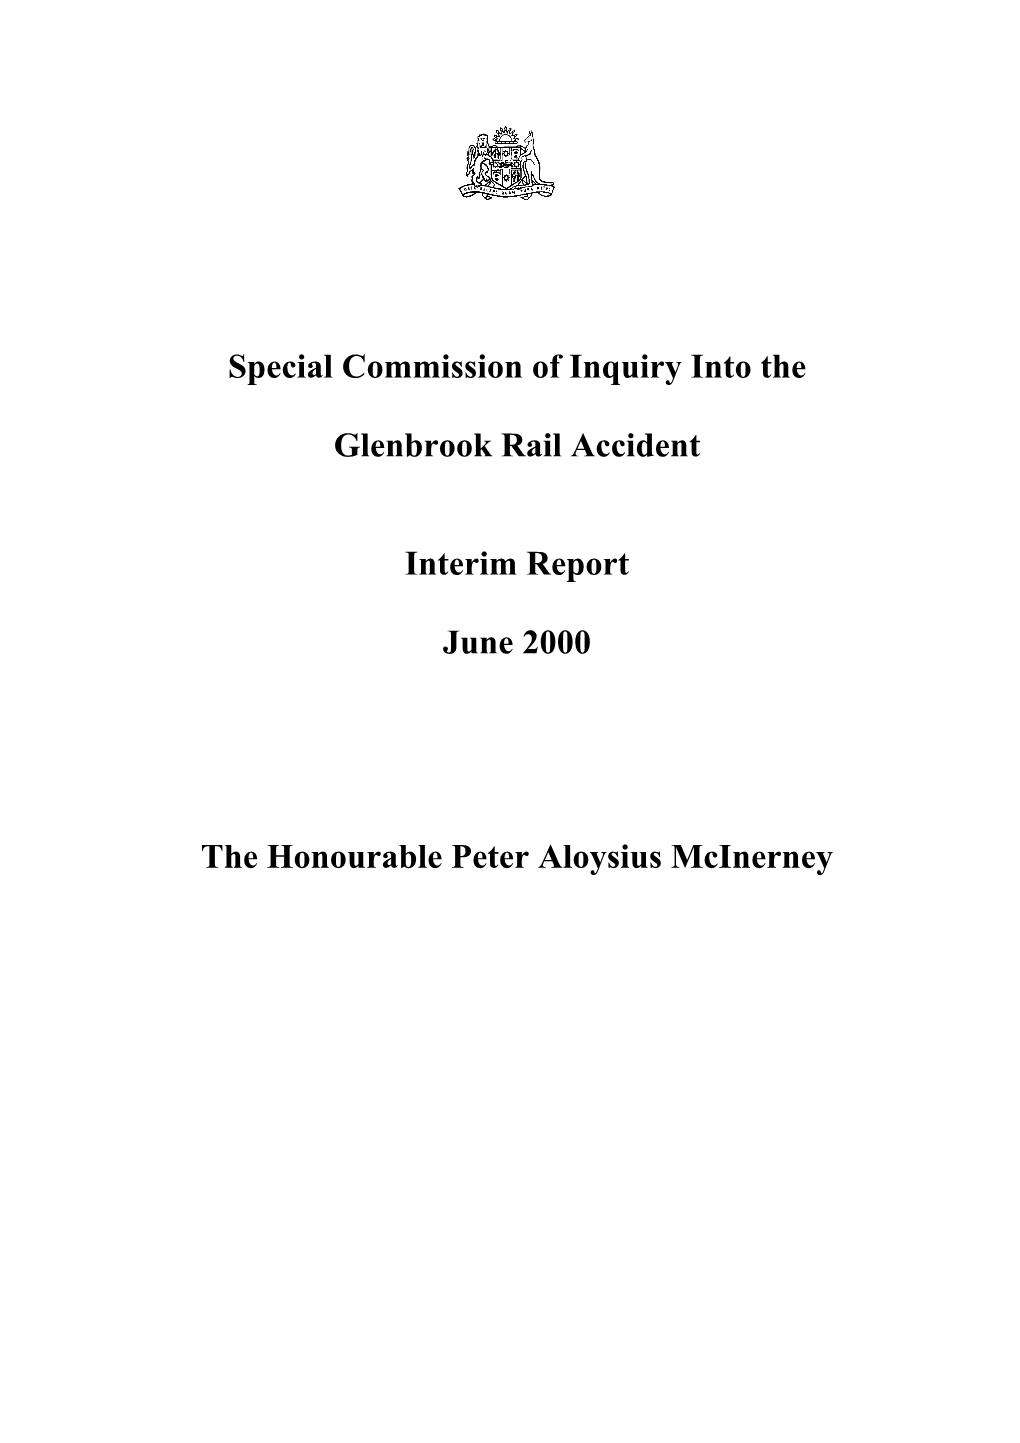 Special Commission of Inquiry Into the Glenbrook Rail Accident Interim